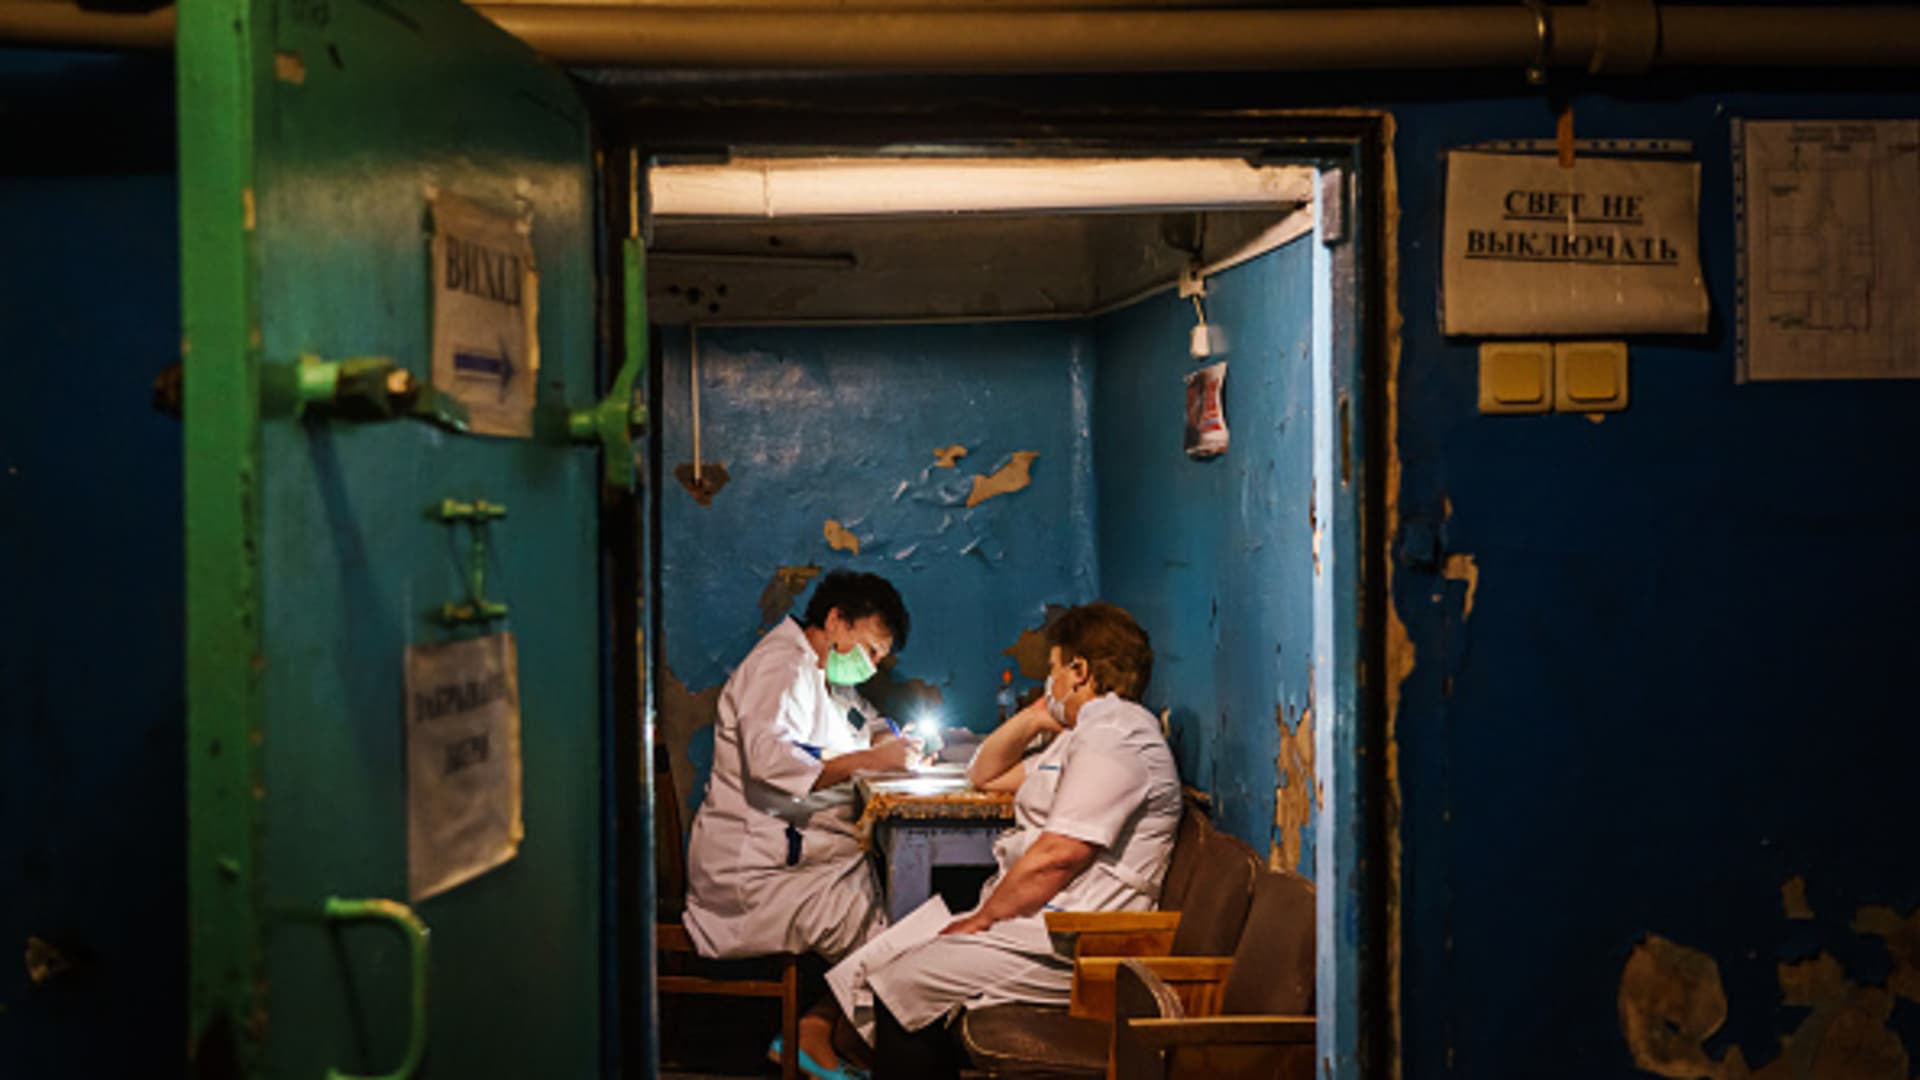 Hospital staff in Ukraine. Many medical facilities have had to move underground amid extensive Russian bombardment.